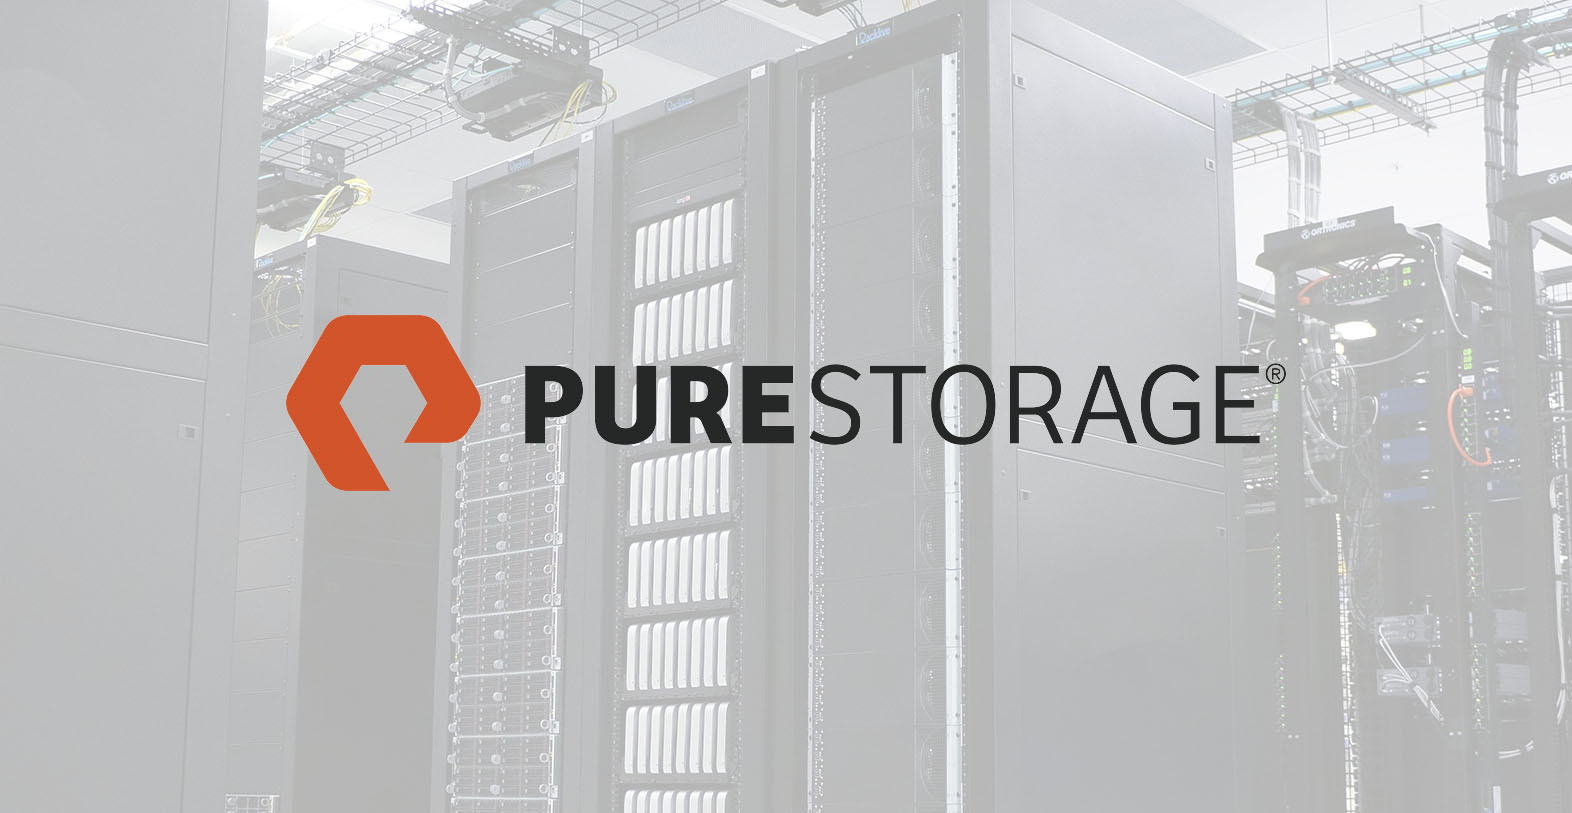 Share Technologies is authorized service partner for Pure Storage since 2019